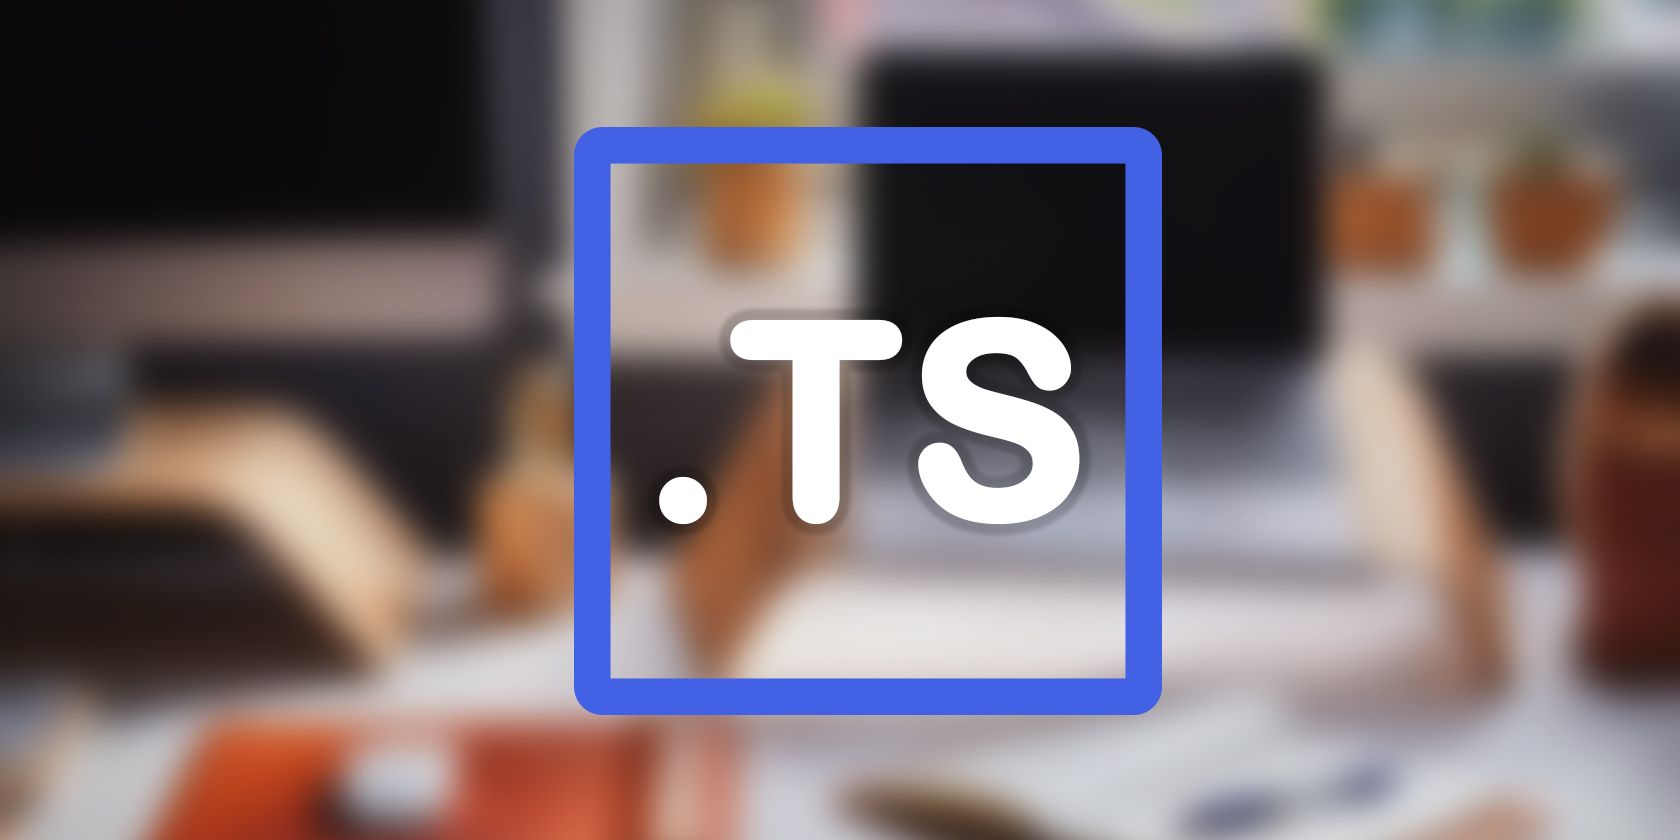 TS File format on a blurred background